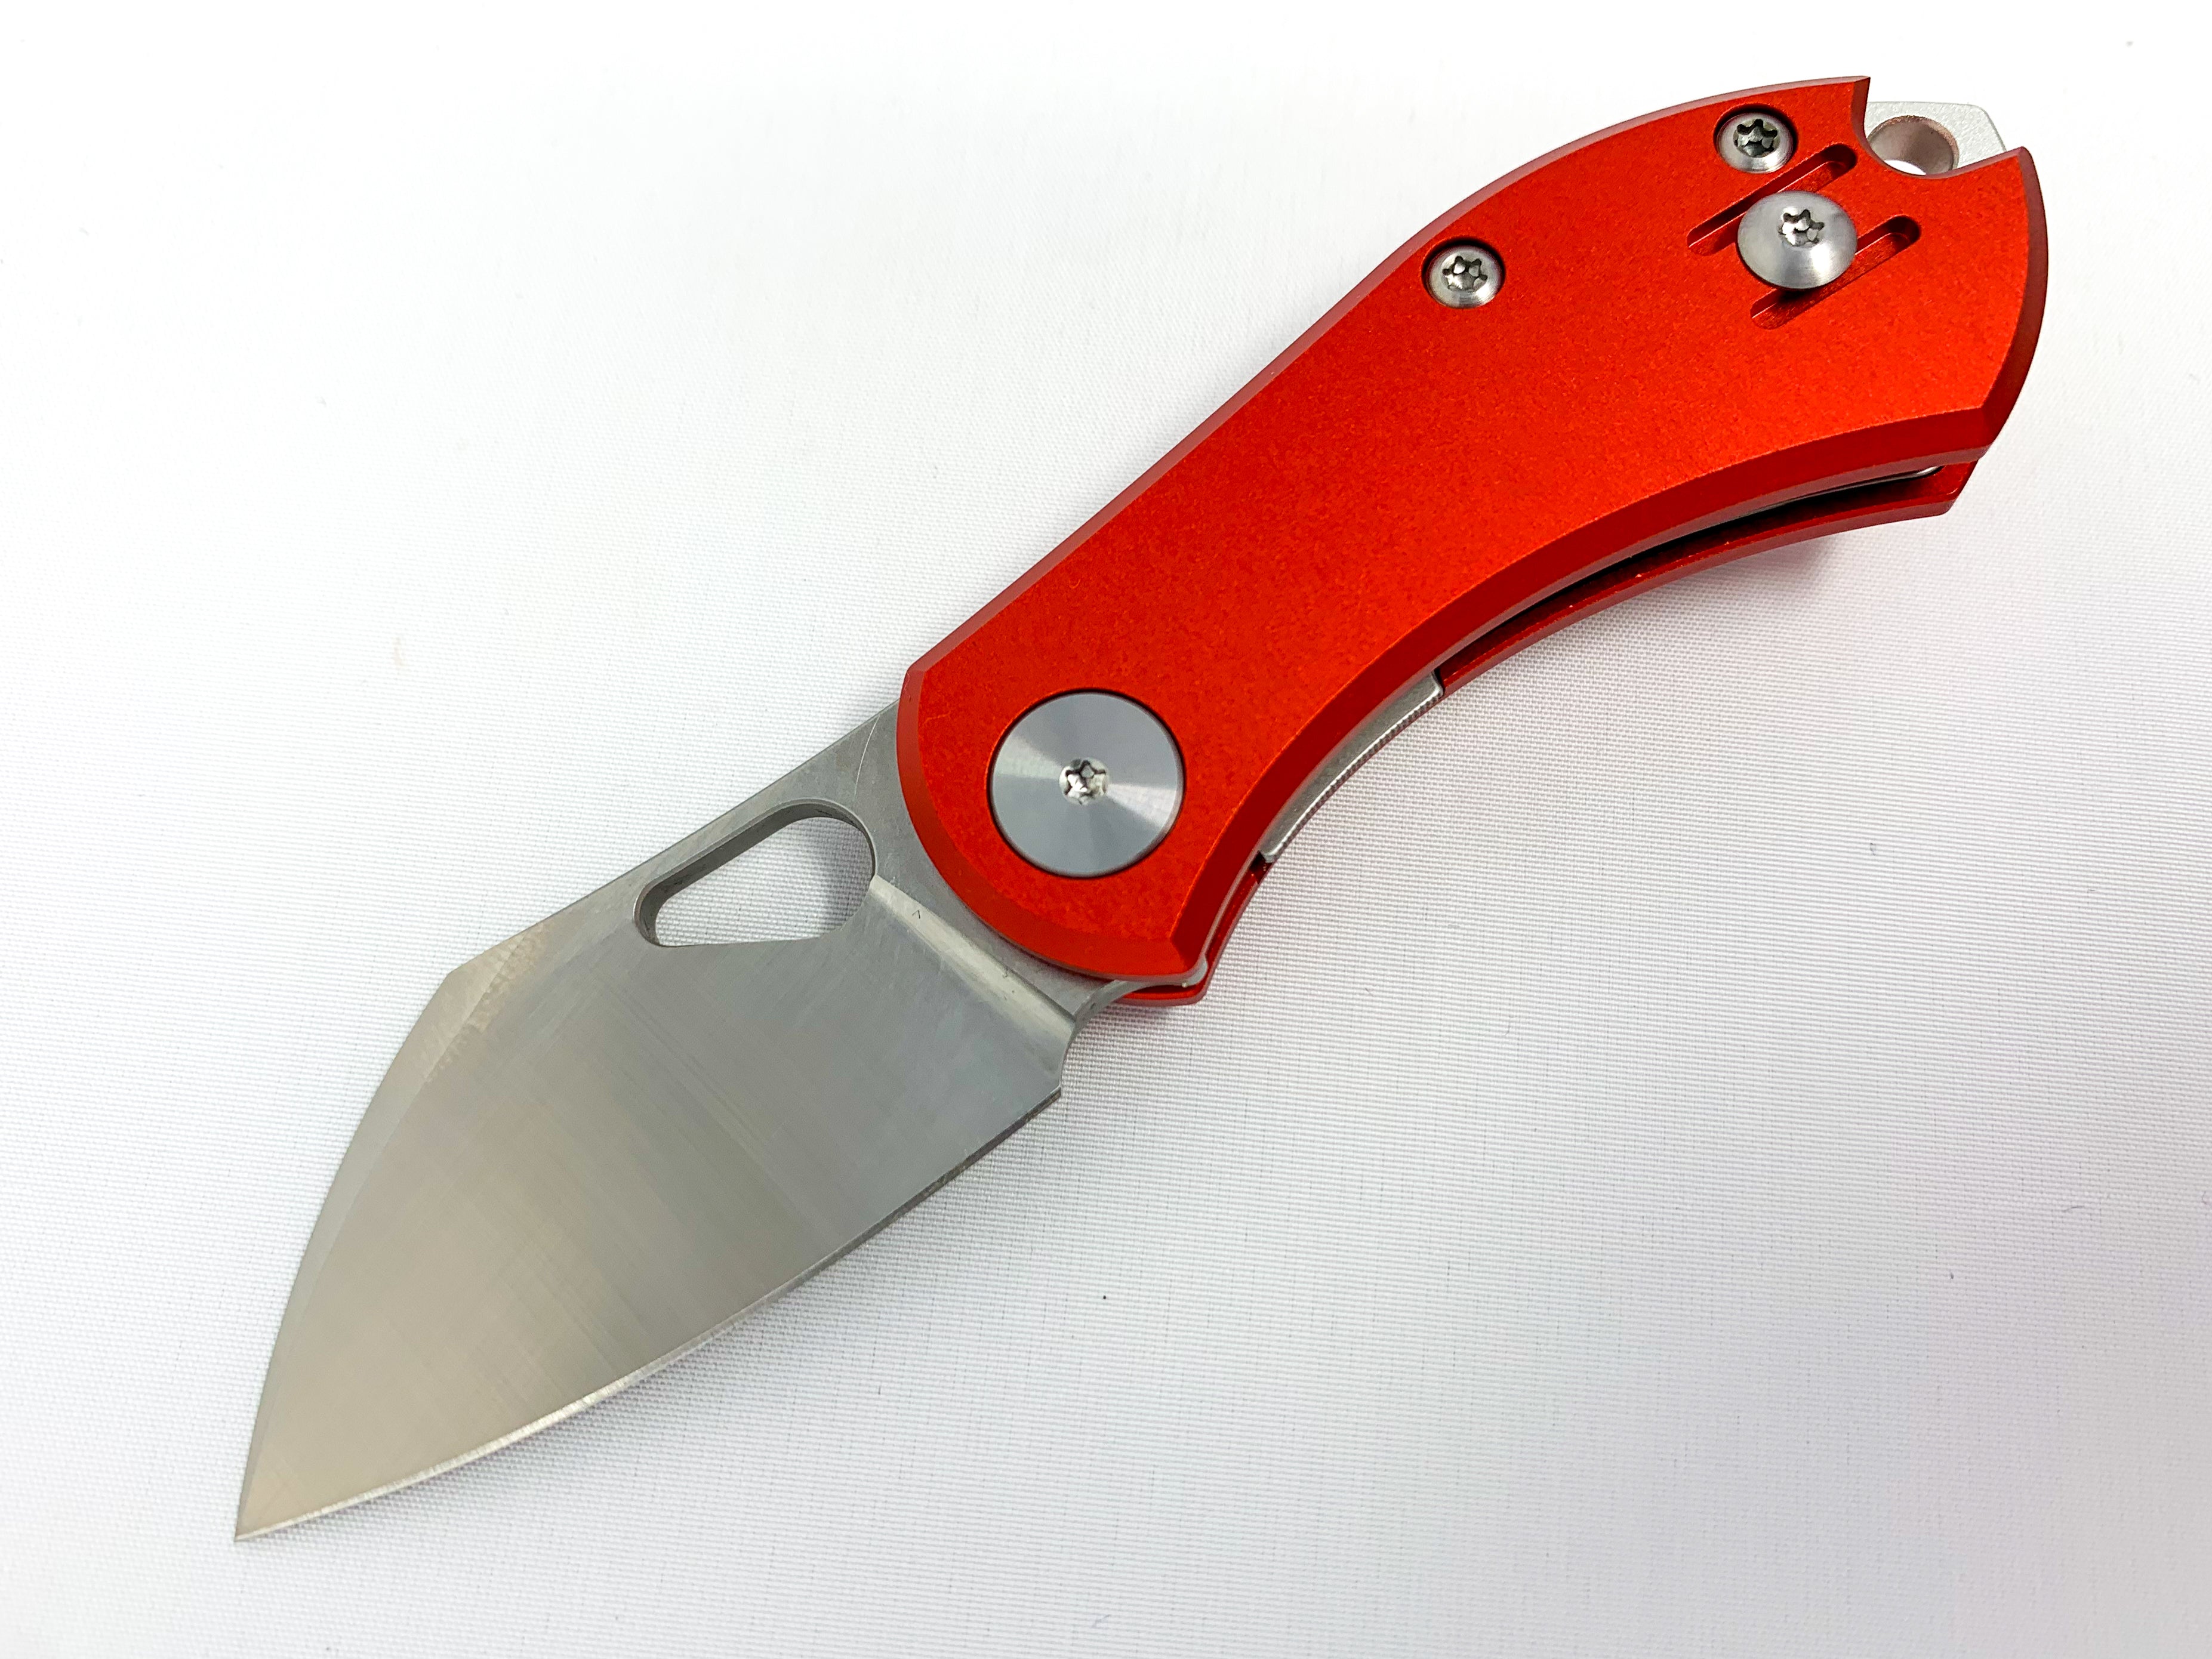 GiantMouse ACE Nibbler - Red Aluminum Handle - N690